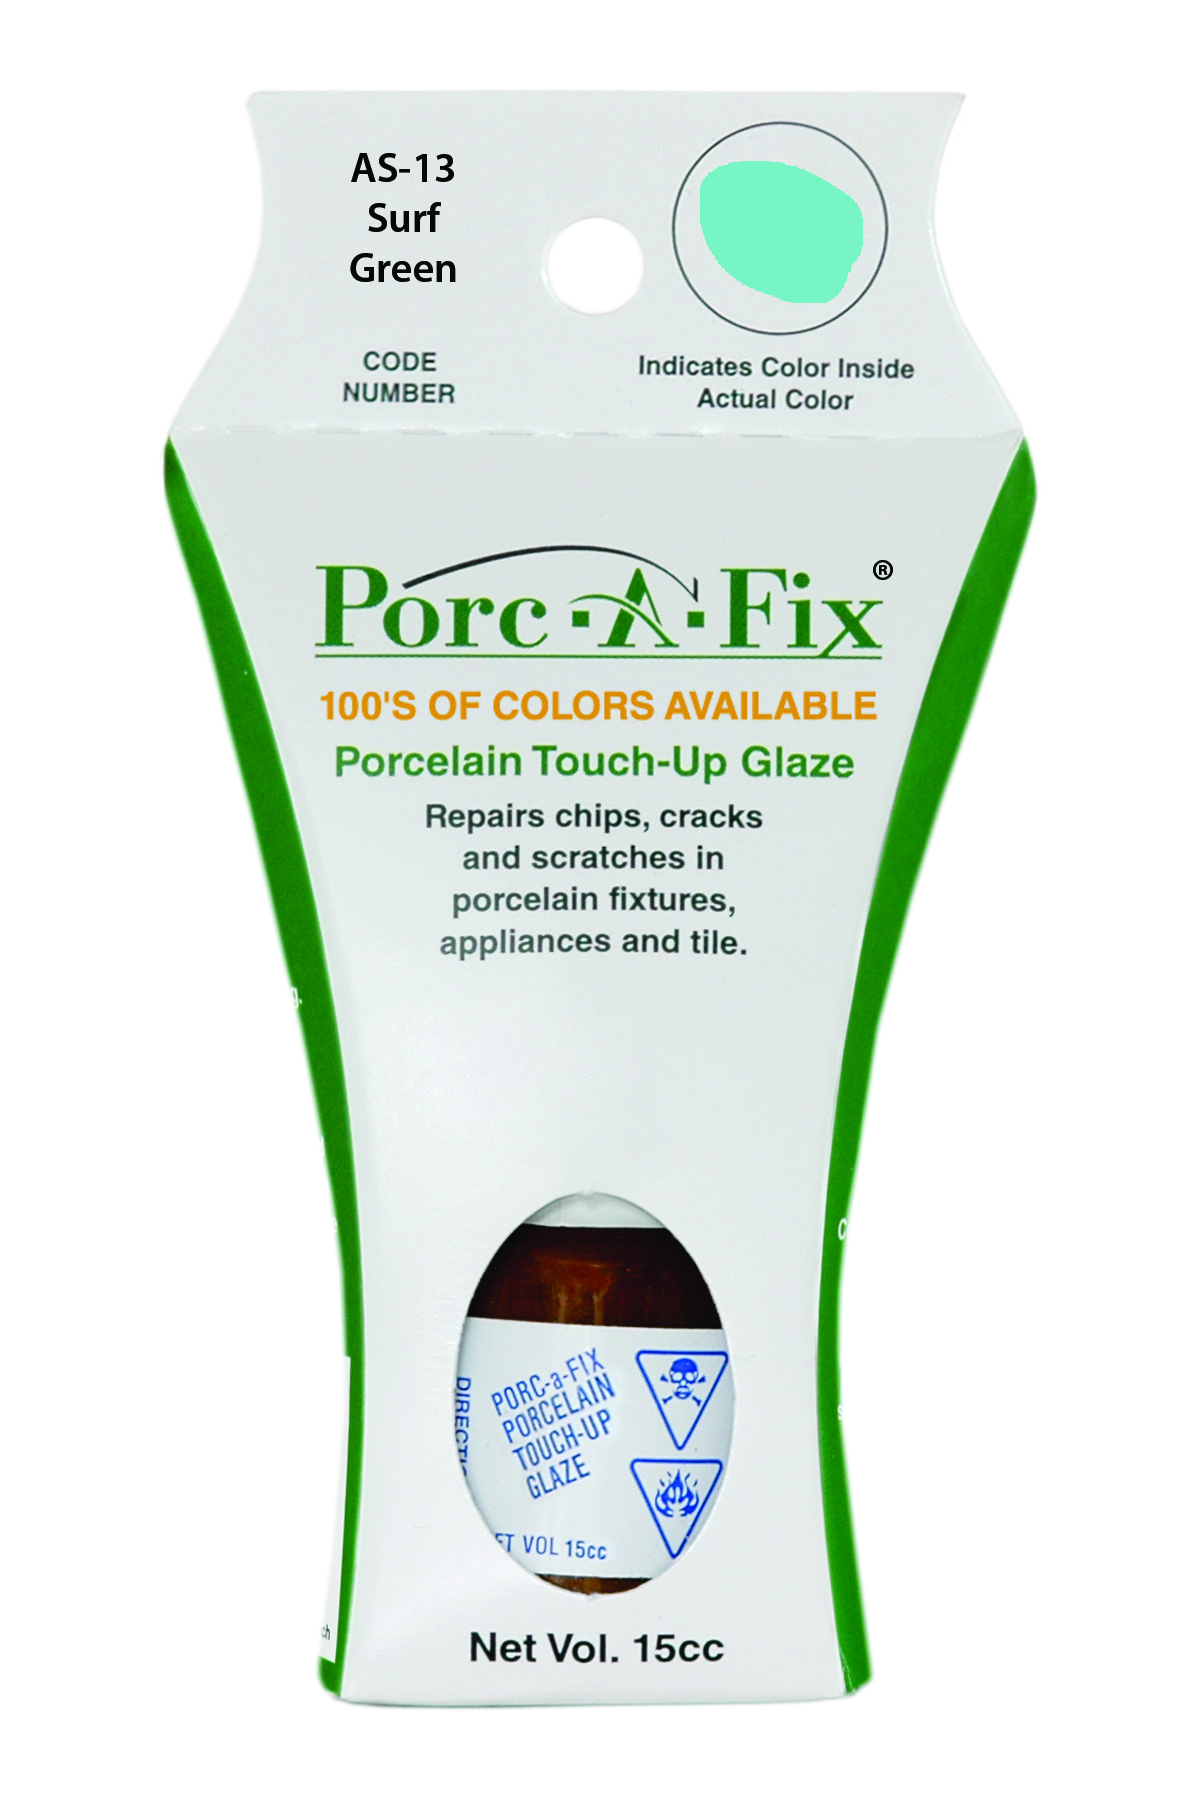 Fixture-Fix | AS-13 | Porc-A-Fix Touch-Up Glaze American Standard Surf Green - Compatible with American Standard 070900-0510A Touch Up Paint Kit - SURF GREEN